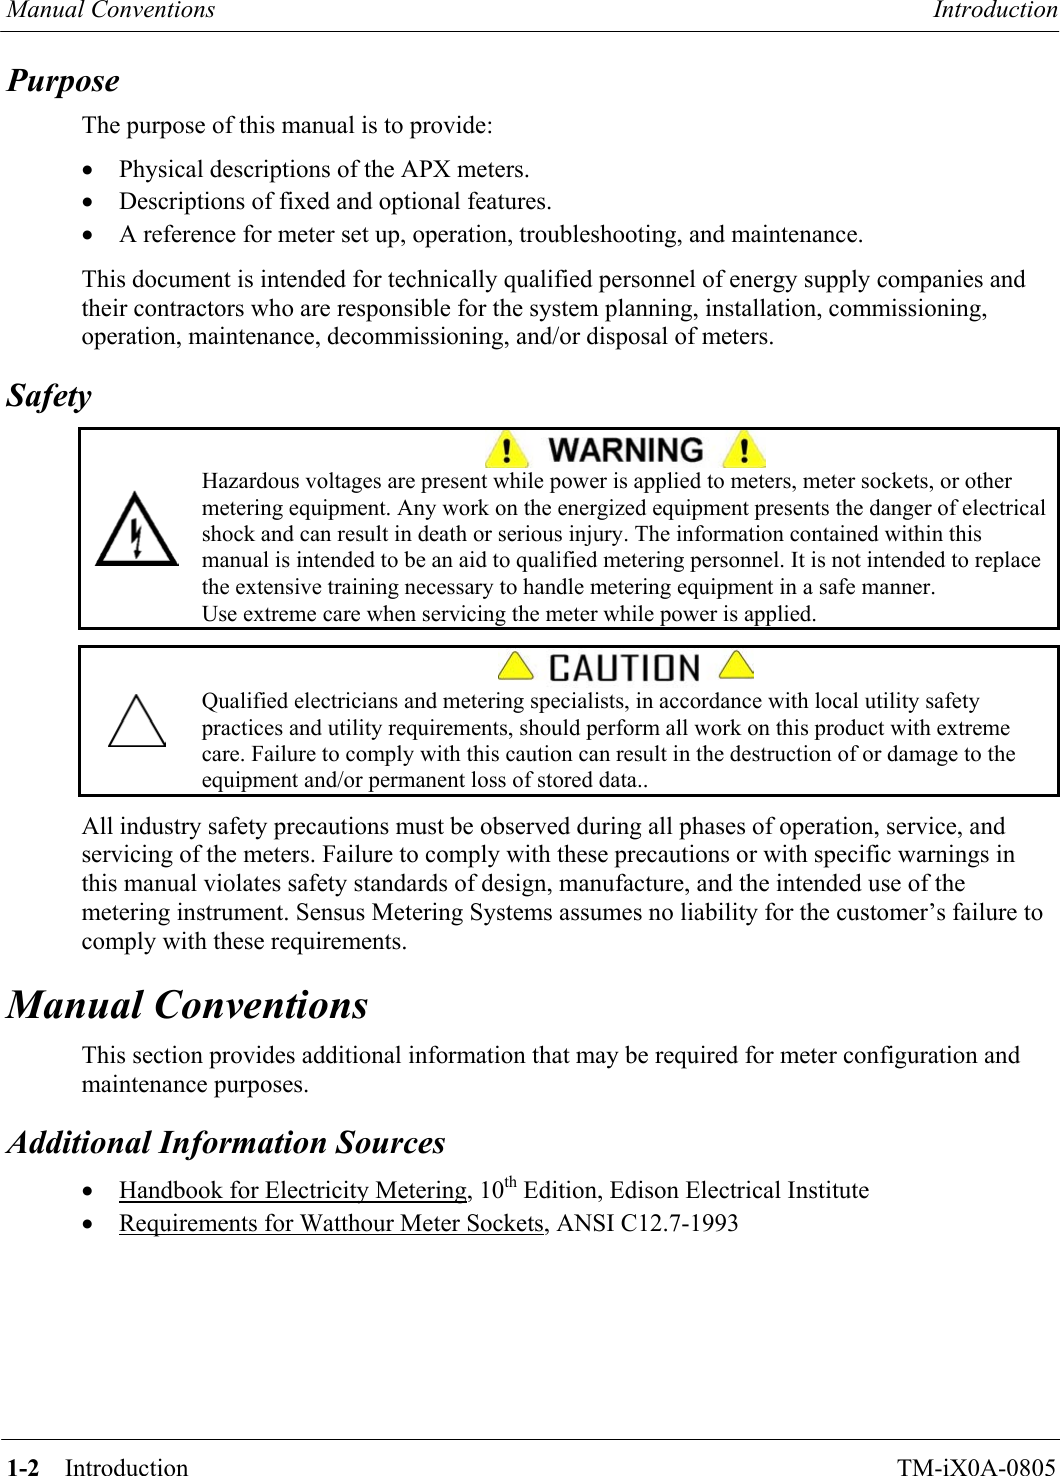 Manual Conventions  Introduction   1-2    Introduction TM-iX0A-0805 Purpose The purpose of this manual is to provide: •  Physical descriptions of the APX meters. •  Descriptions of fixed and optional features. •  A reference for meter set up, operation, troubleshooting, and maintenance.  This document is intended for technically qualified personnel of energy supply companies and their contractors who are responsible for the system planning, installation, commissioning, operation, maintenance, decommissioning, and/or disposal of meters. Safety   Hazardous voltages are present while power is applied to meters, meter sockets, or other metering equipment. Any work on the energized equipment presents the danger of electrical shock and can result in death or serious injury. The information contained within this manual is intended to be an aid to qualified metering personnel. It is not intended to replace the extensive training necessary to handle metering equipment in a safe manner. Use extreme care when servicing the meter while power is applied.    Qualified electricians and metering specialists, in accordance with local utility safety practices and utility requirements, should perform all work on this product with extreme care. Failure to comply with this caution can result in the destruction of or damage to the equipment and/or permanent loss of stored data..  All industry safety precautions must be observed during all phases of operation, service, and servicing of the meters. Failure to comply with these precautions or with specific warnings in this manual violates safety standards of design, manufacture, and the intended use of the metering instrument. Sensus Metering Systems assumes no liability for the customer’s failure to comply with these requirements. Manual Conventions This section provides additional information that may be required for meter configuration and maintenance purposes. Additional Information Sources •  Handbook for Electricity Metering, 10th Edition, Edison Electrical Institute •  Requirements for Watthour Meter Sockets, ANSI C12.7-1993      